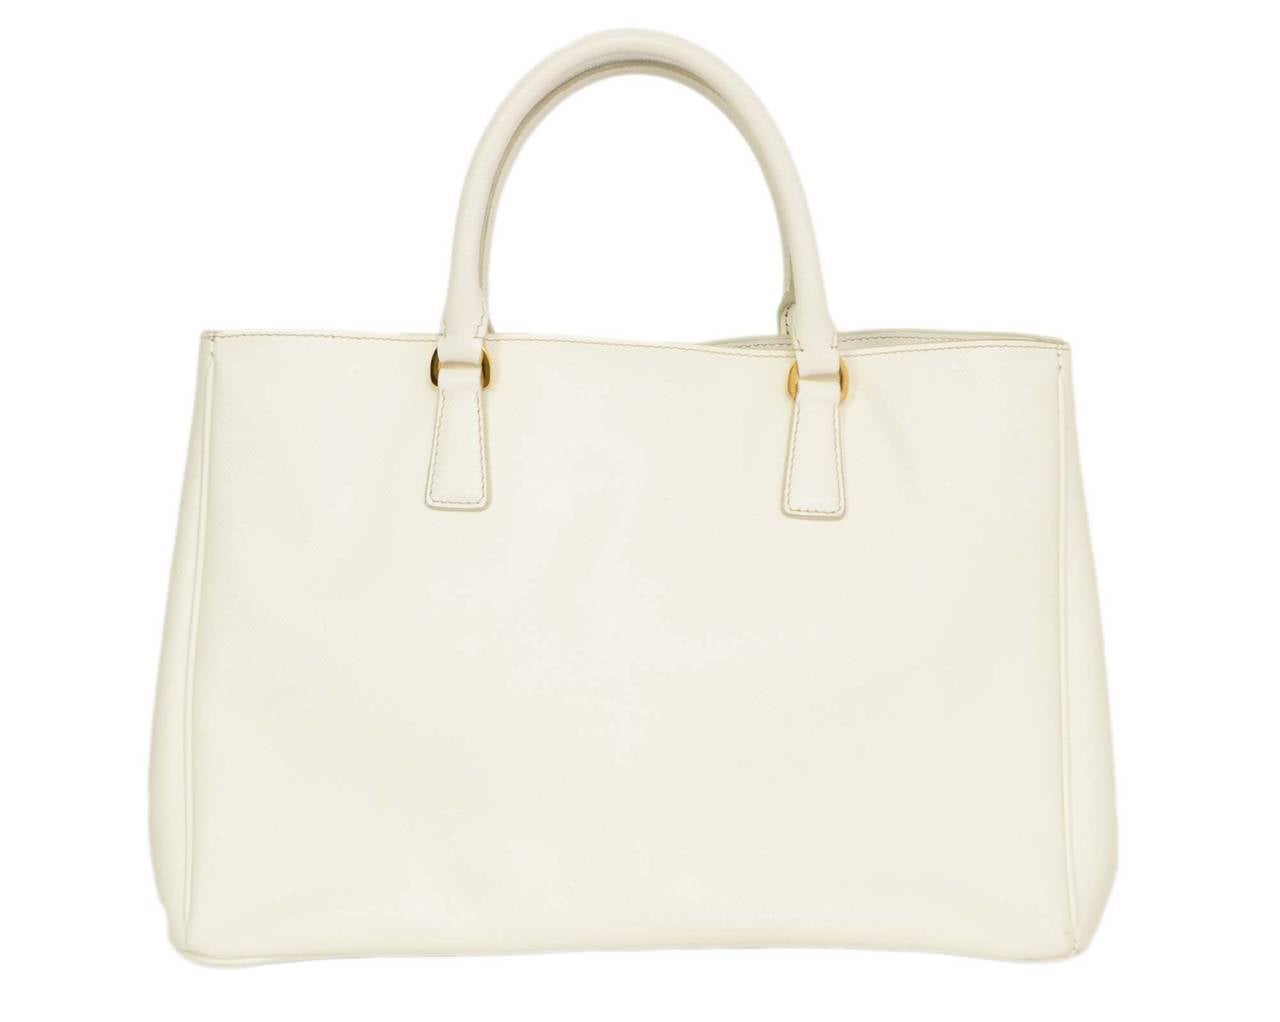 PRADA White Saffiano Leather Tote Bag GHW In Excellent Condition In New York, NY